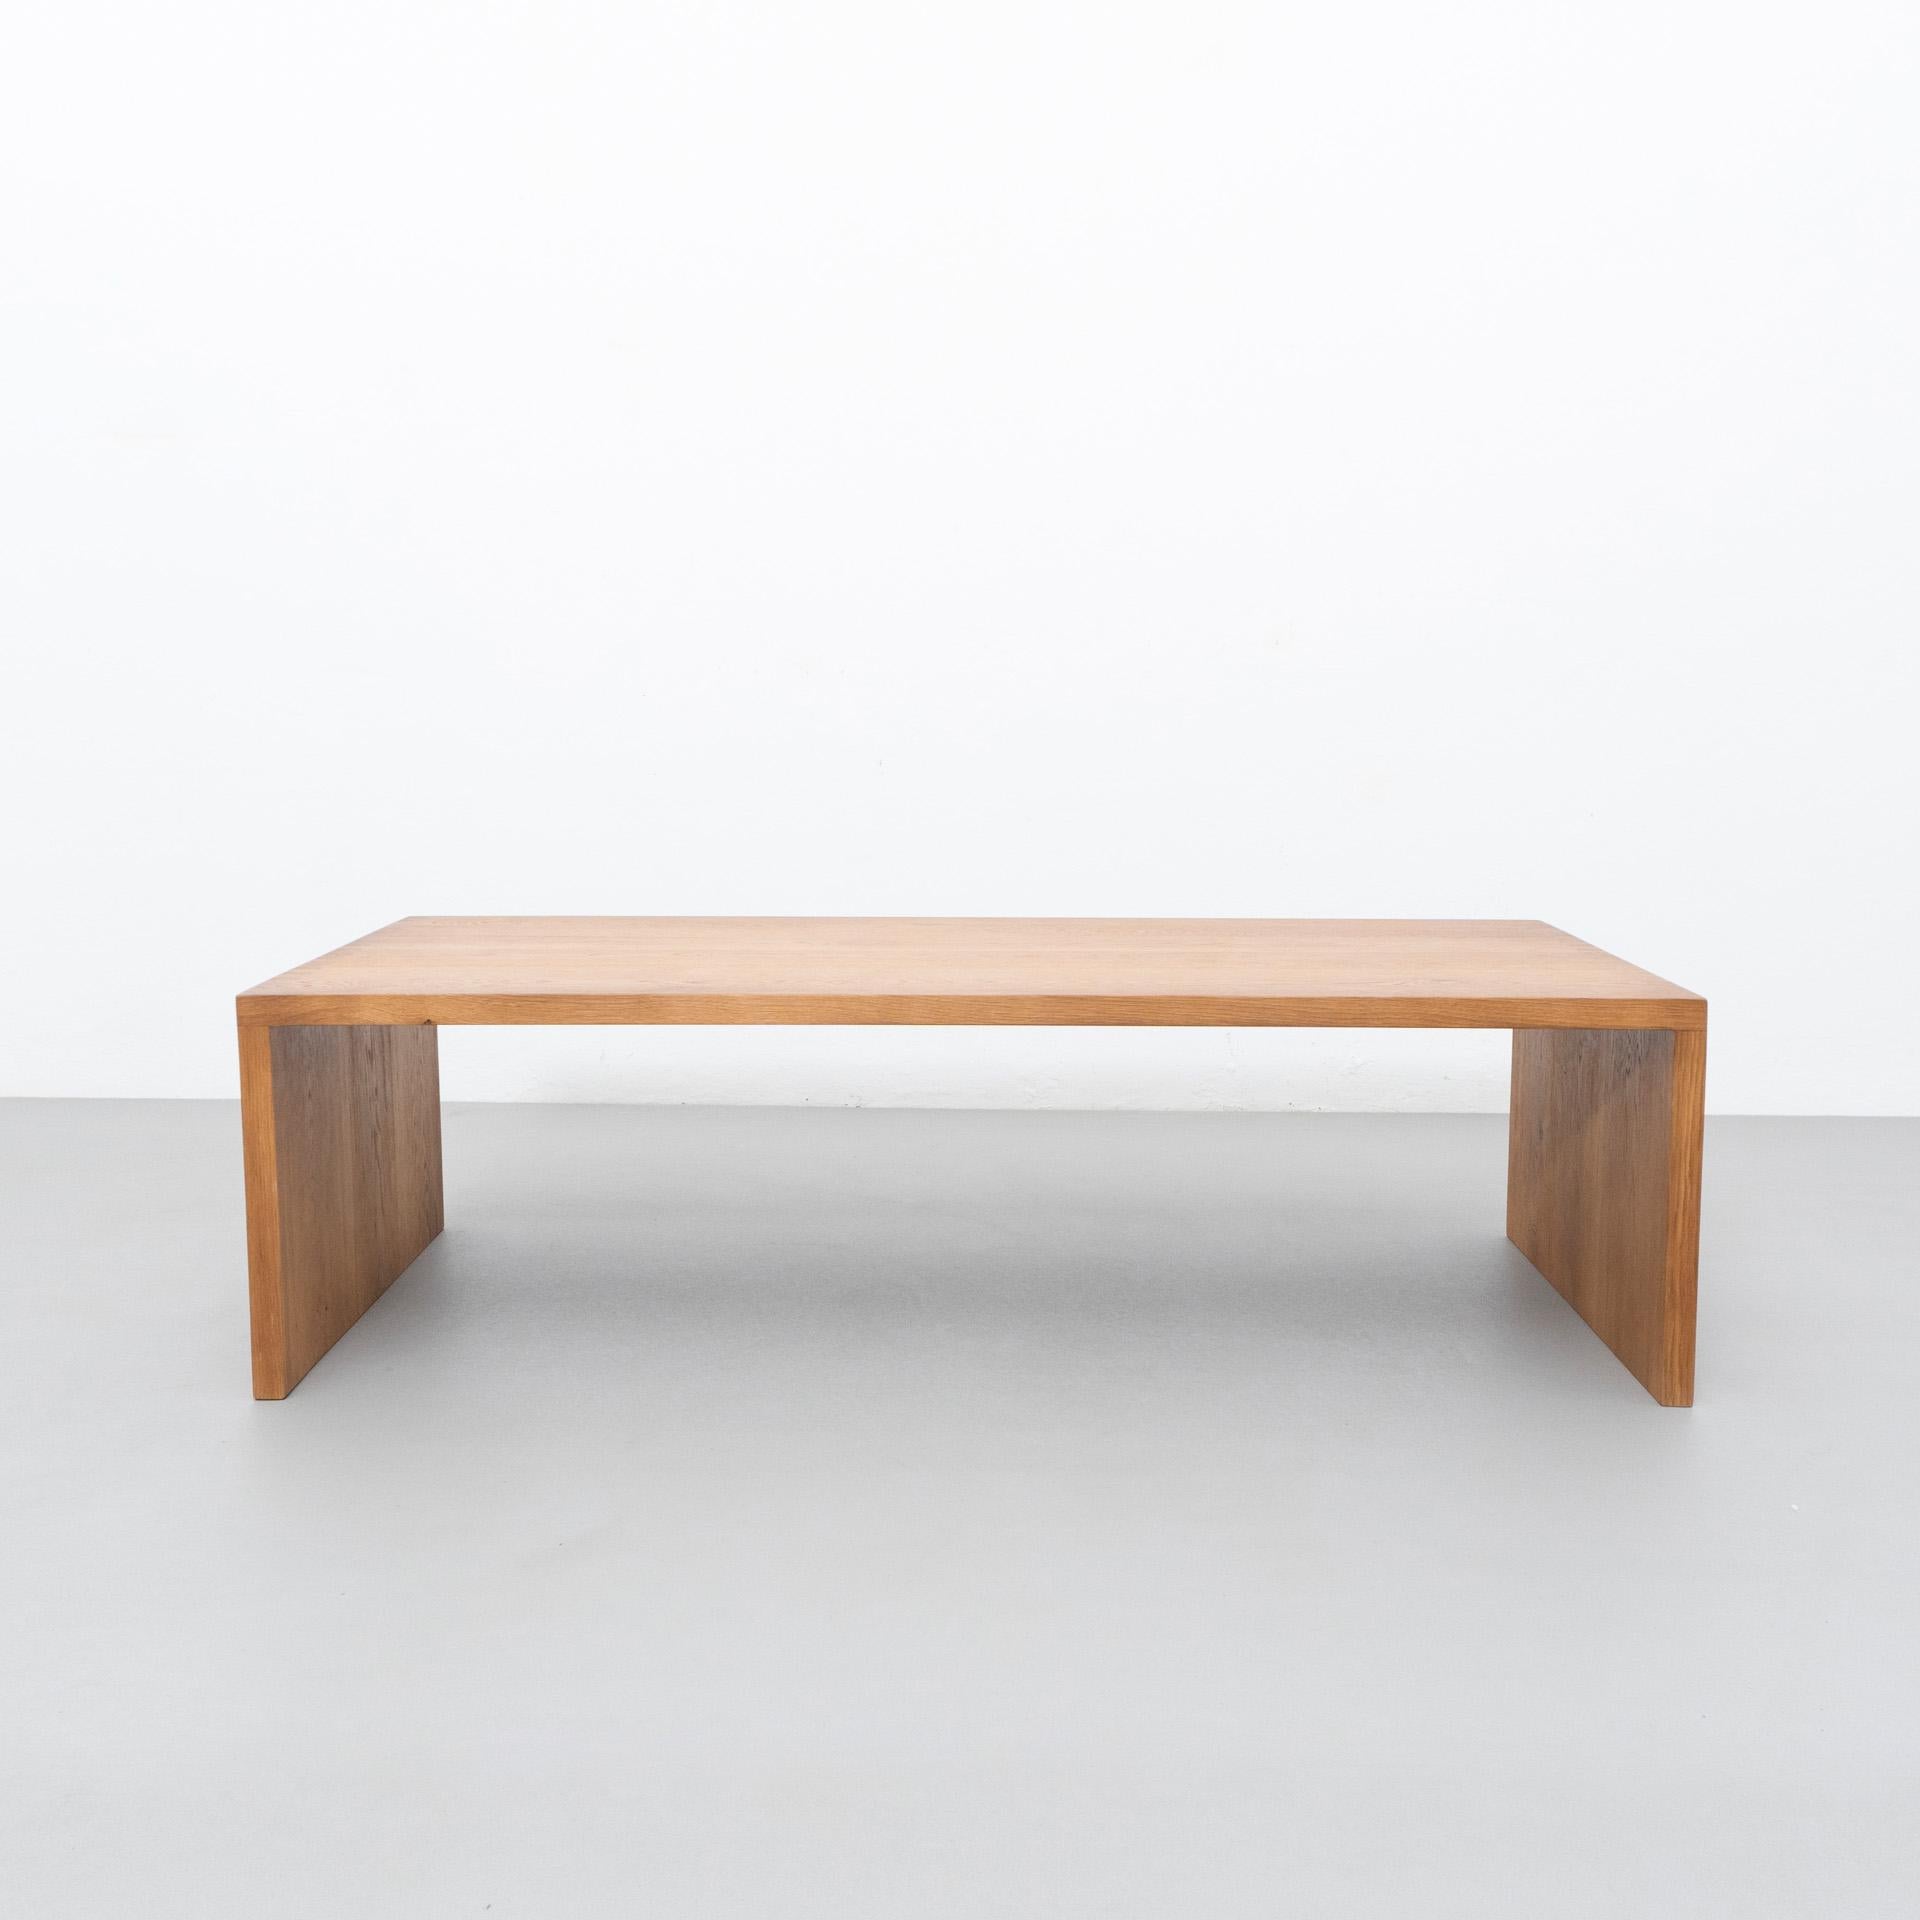 Table by Dada Est. manufactured in Barcelona, 2021.

 Oak table

Measures: 62 cm D x 140 cm W x 40 cm H 

There is the possibility of making it in different measures and woods.

Dada Est. Makes a handmade furniture production with the best materials